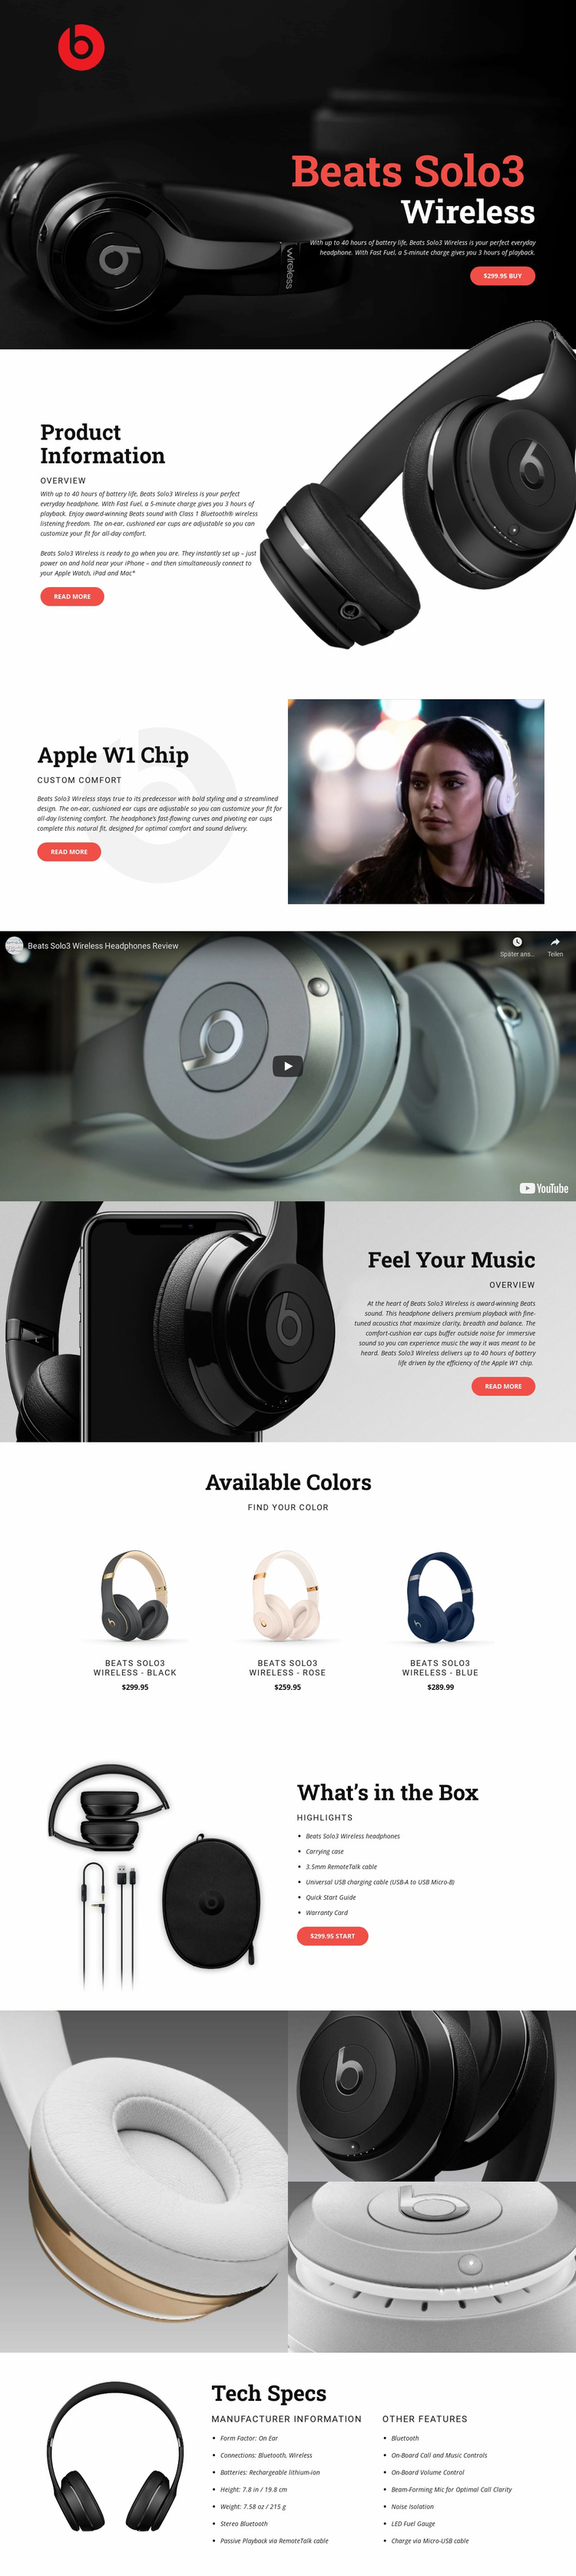 Outstanding quality of music Landing Page